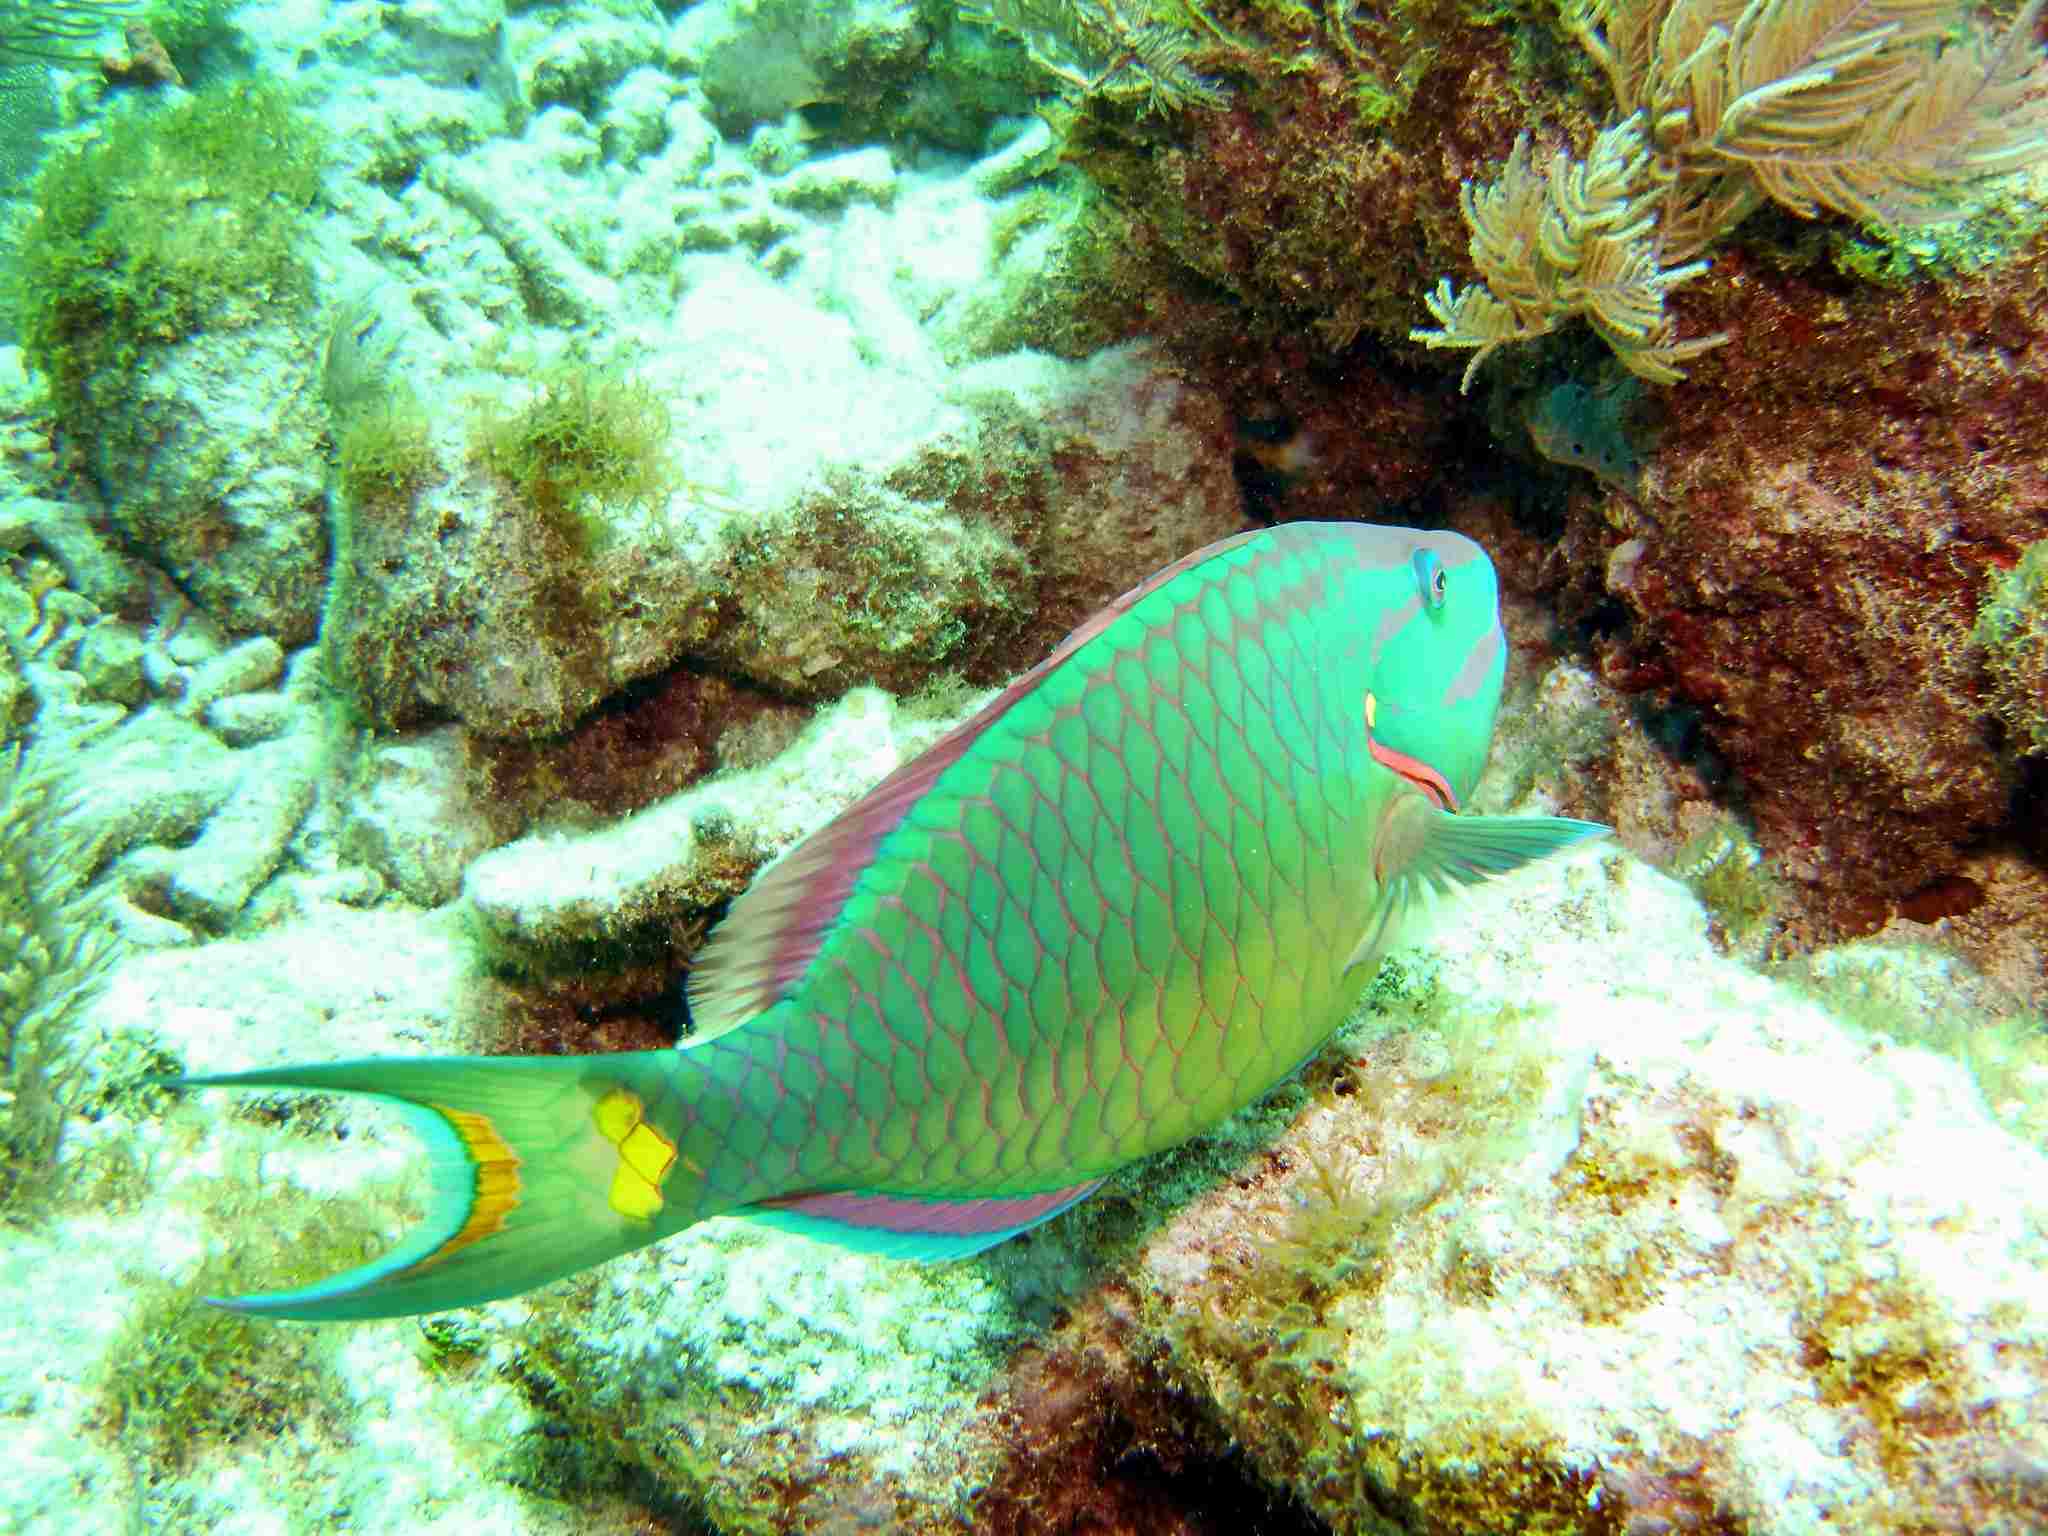 What Eats a Parrotfish: Excretion of White Sand is an Ecological Role Attributed to Parrotfish (Credit: Greg Grimes 2009 .CC BY-SA 2.0.)